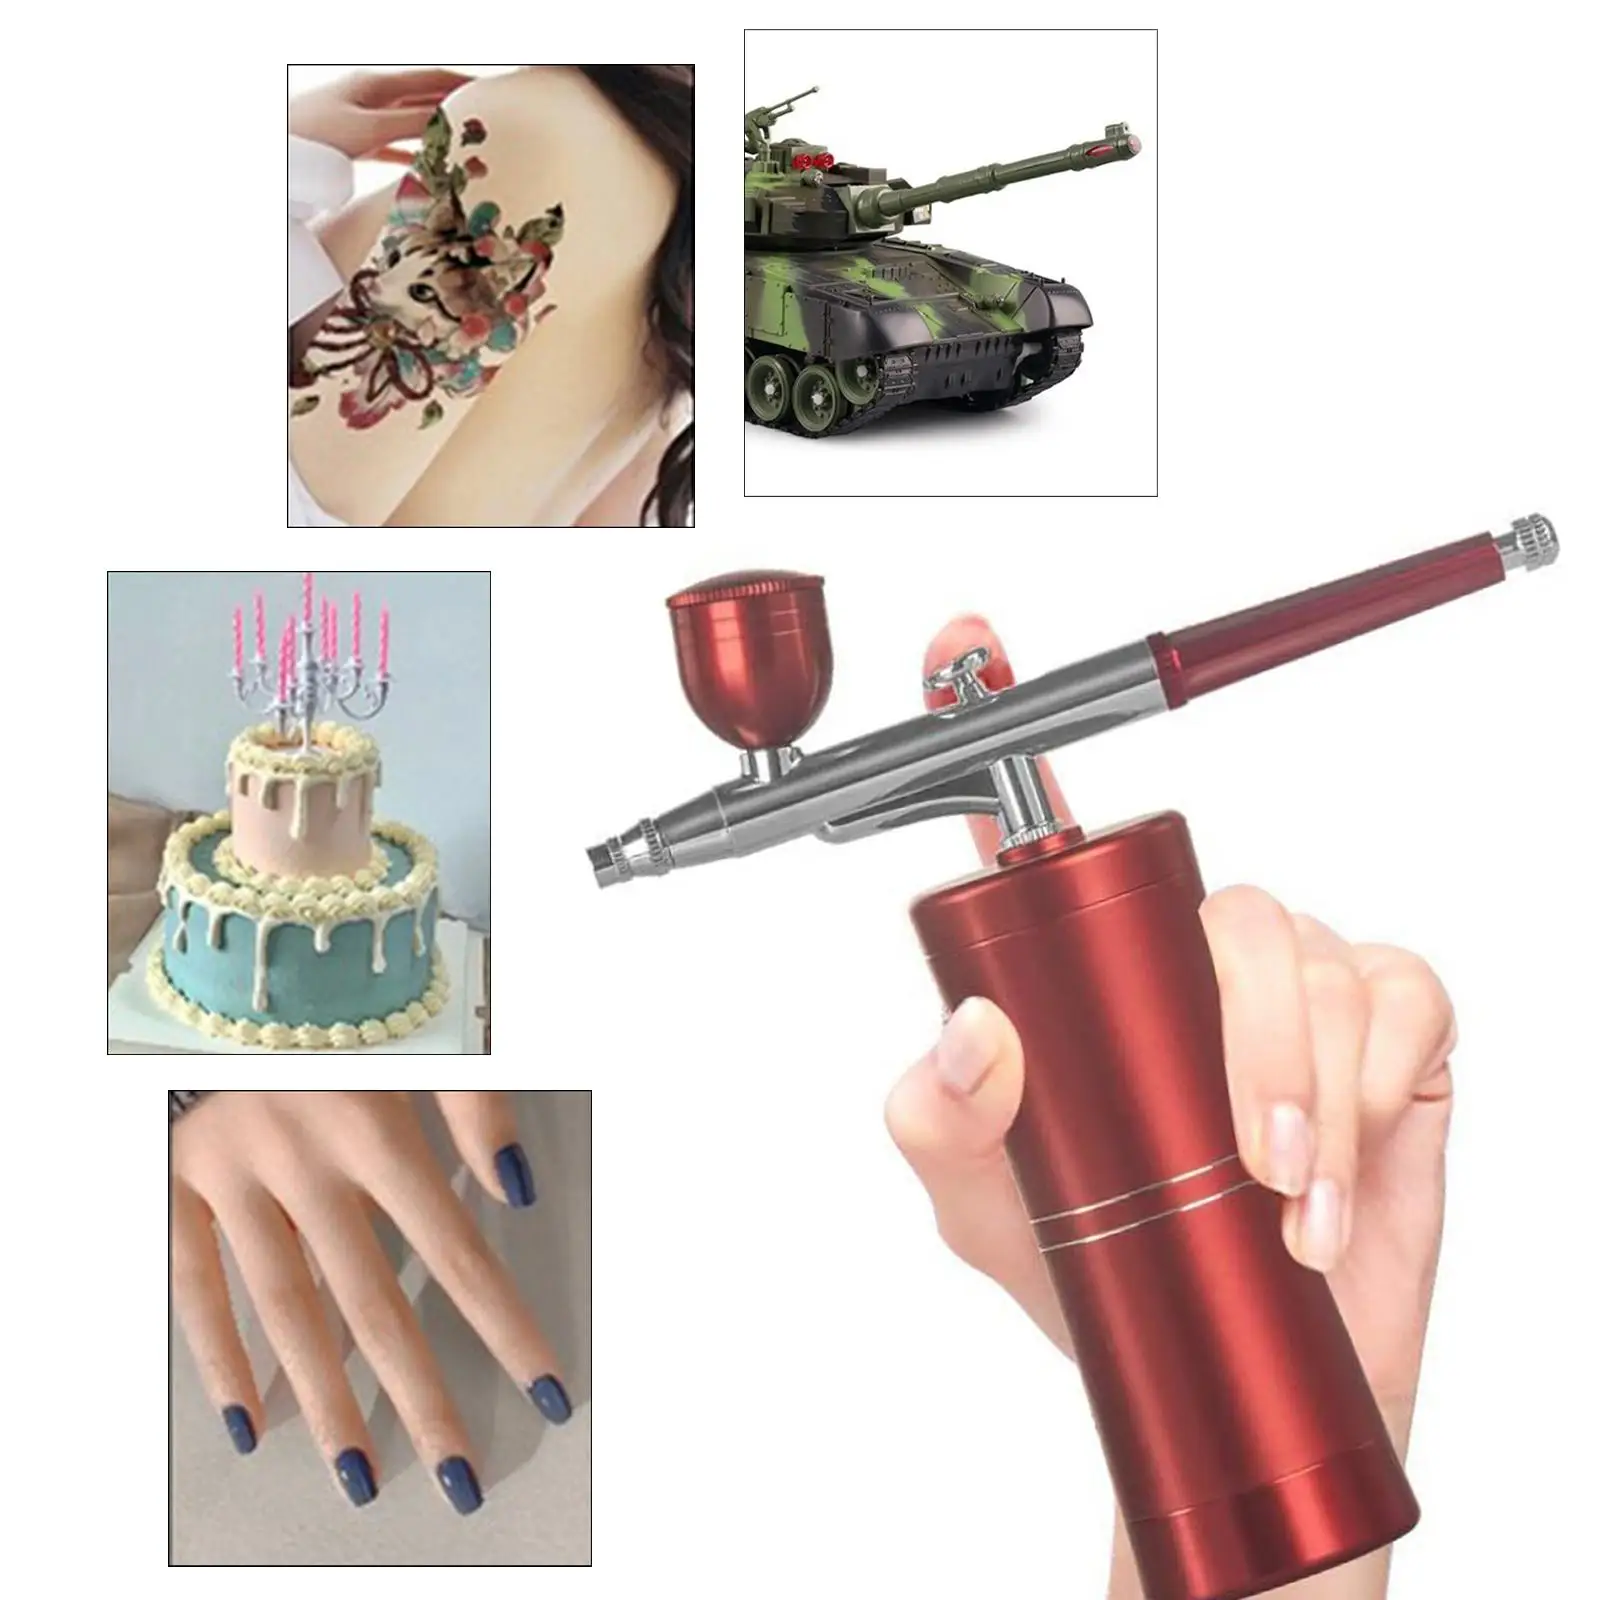 Airbrush Moisturize Painting Automatic Gravity feed for Model Paint Kit Accs